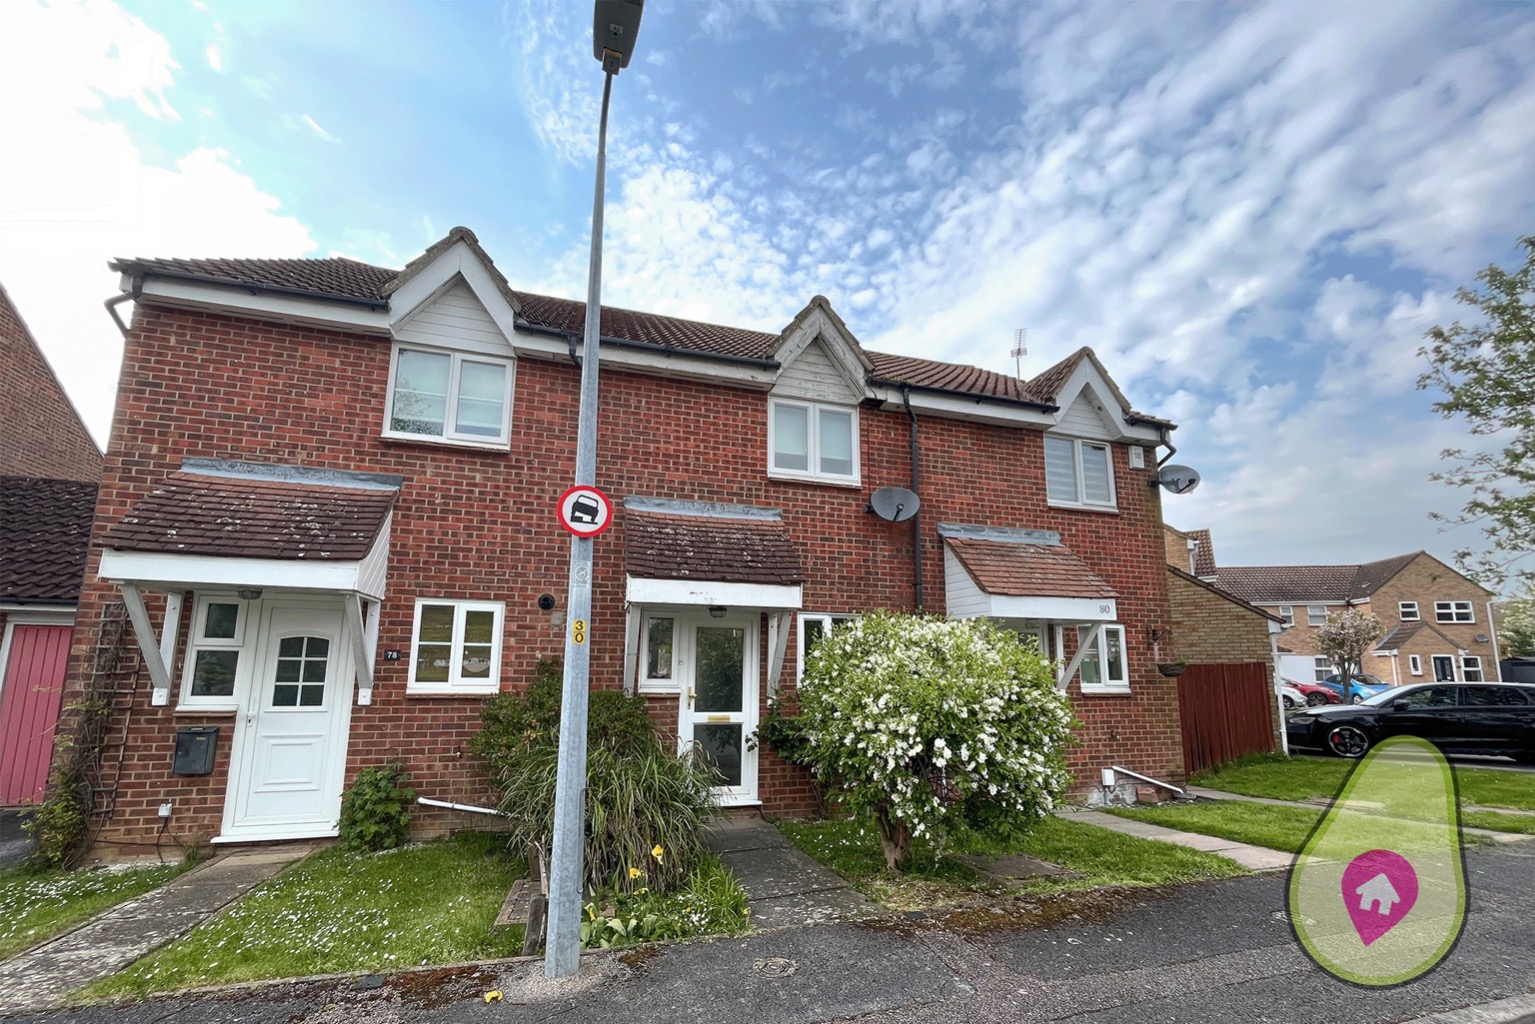 2 bed terraced house to rent in Chalkdown, Stevenage - Property Image 1